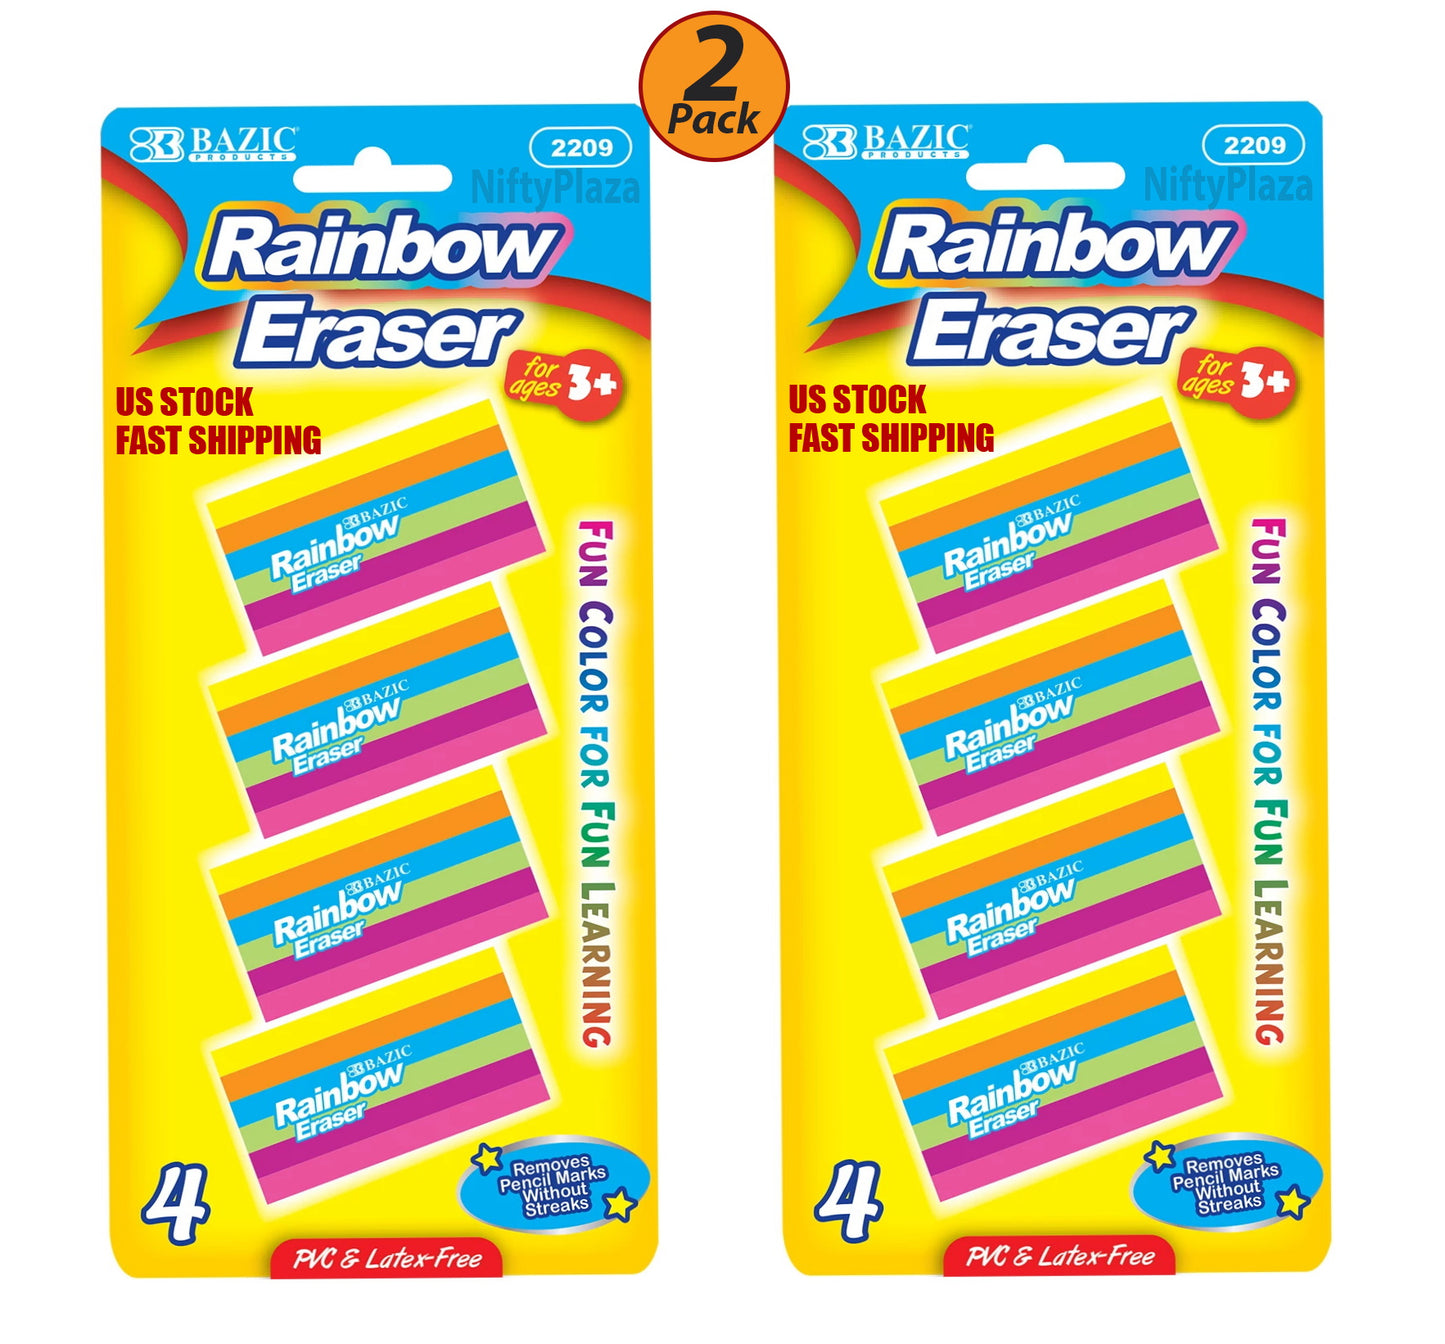 2 Pack - Rainbow Eraser Soft and Non-abrasive High-quality cleans easily removes Pencil Marks without Smudges